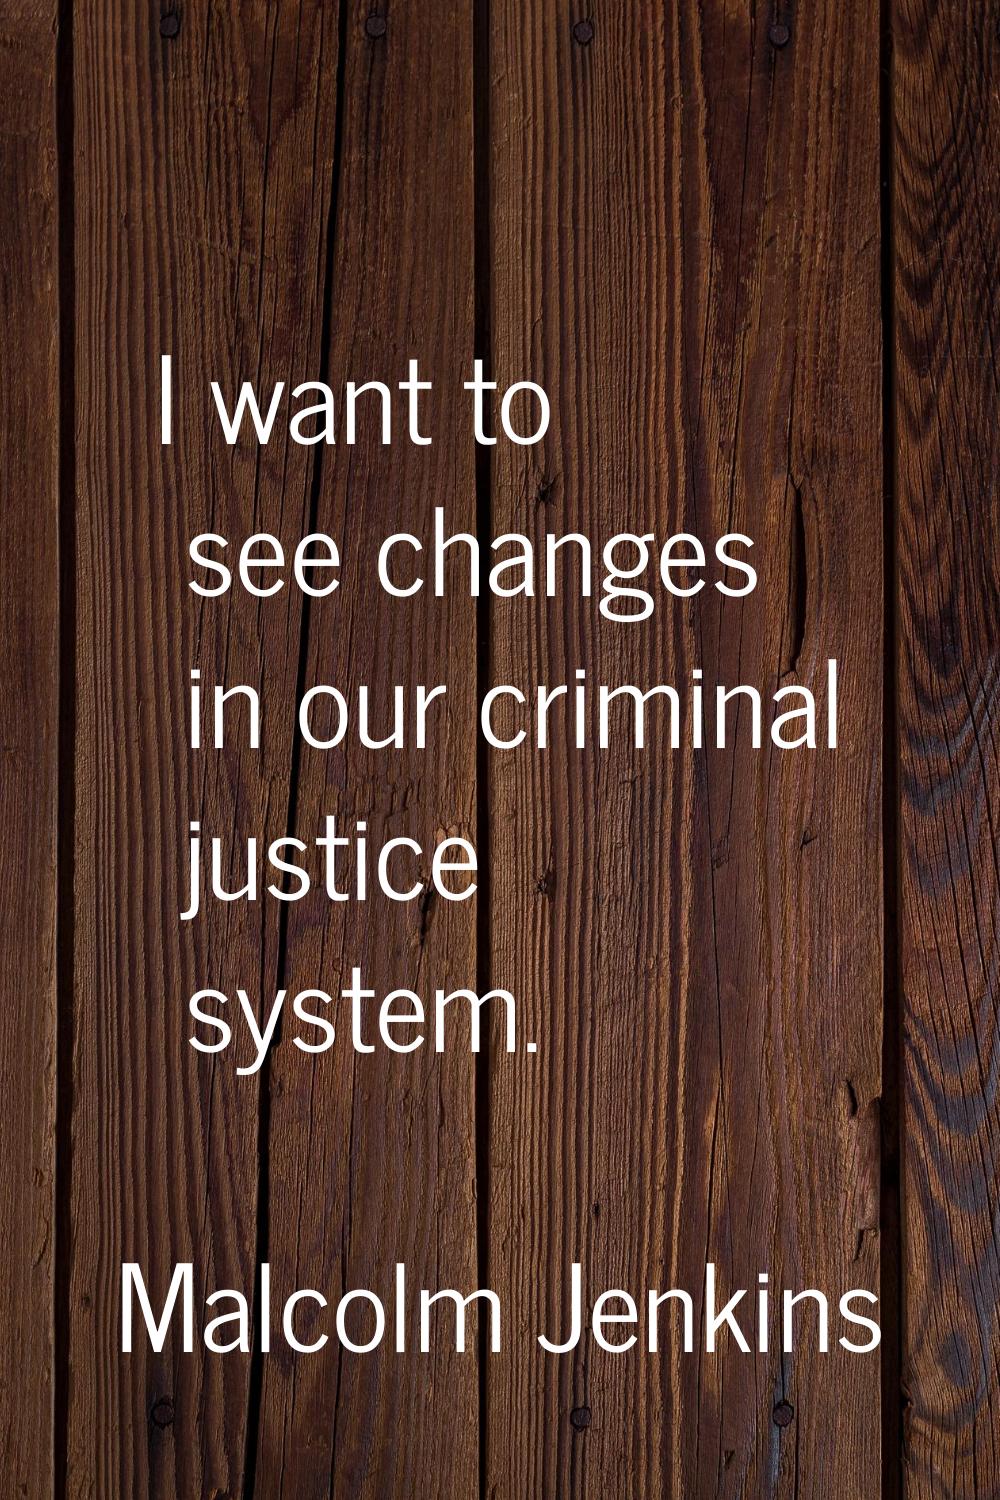 I want to see changes in our criminal justice system.